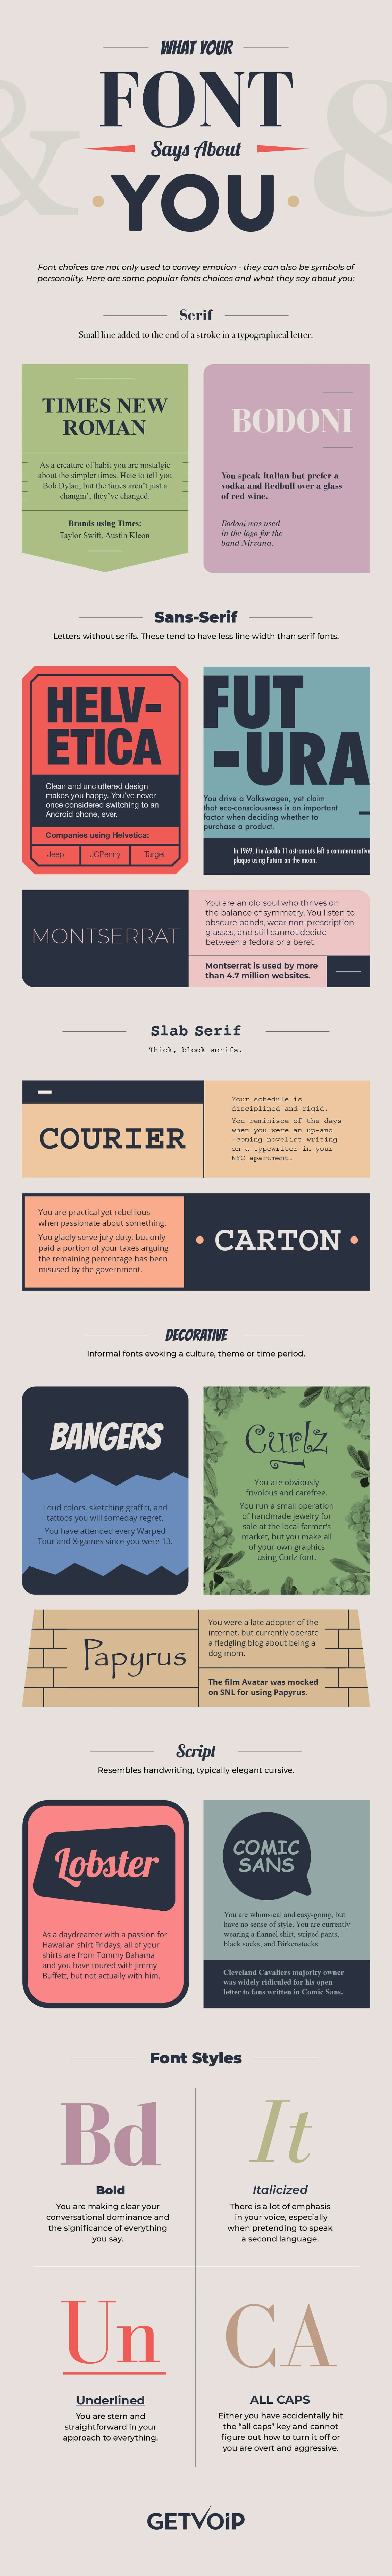 What Your Font Choices Say About You - #infographic